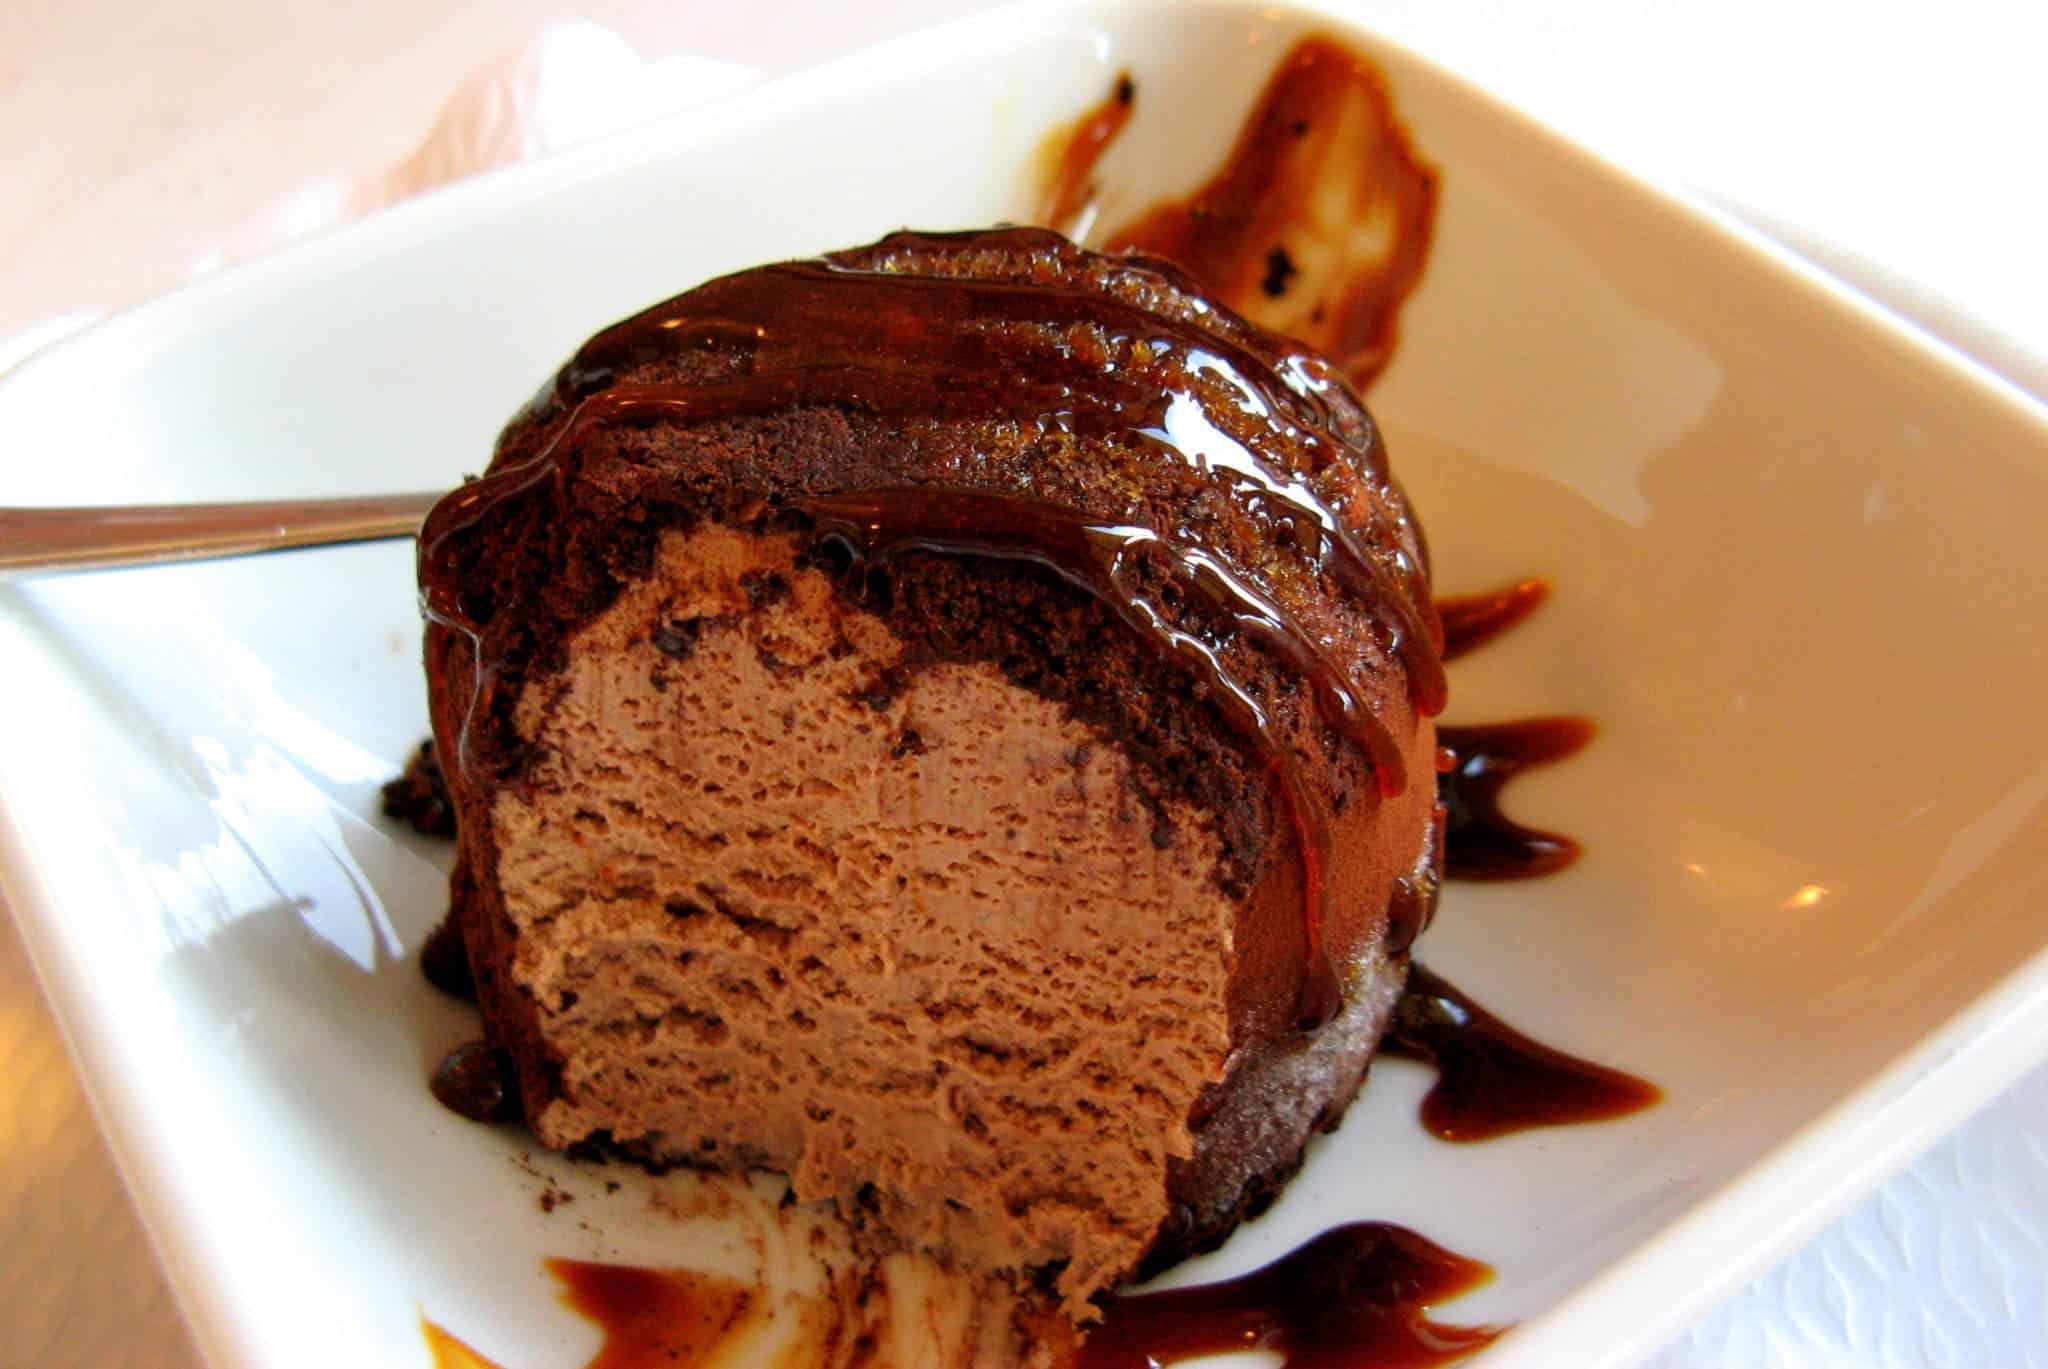 Tartufo, a desert covered in chocolate. Photo by Anna Fox